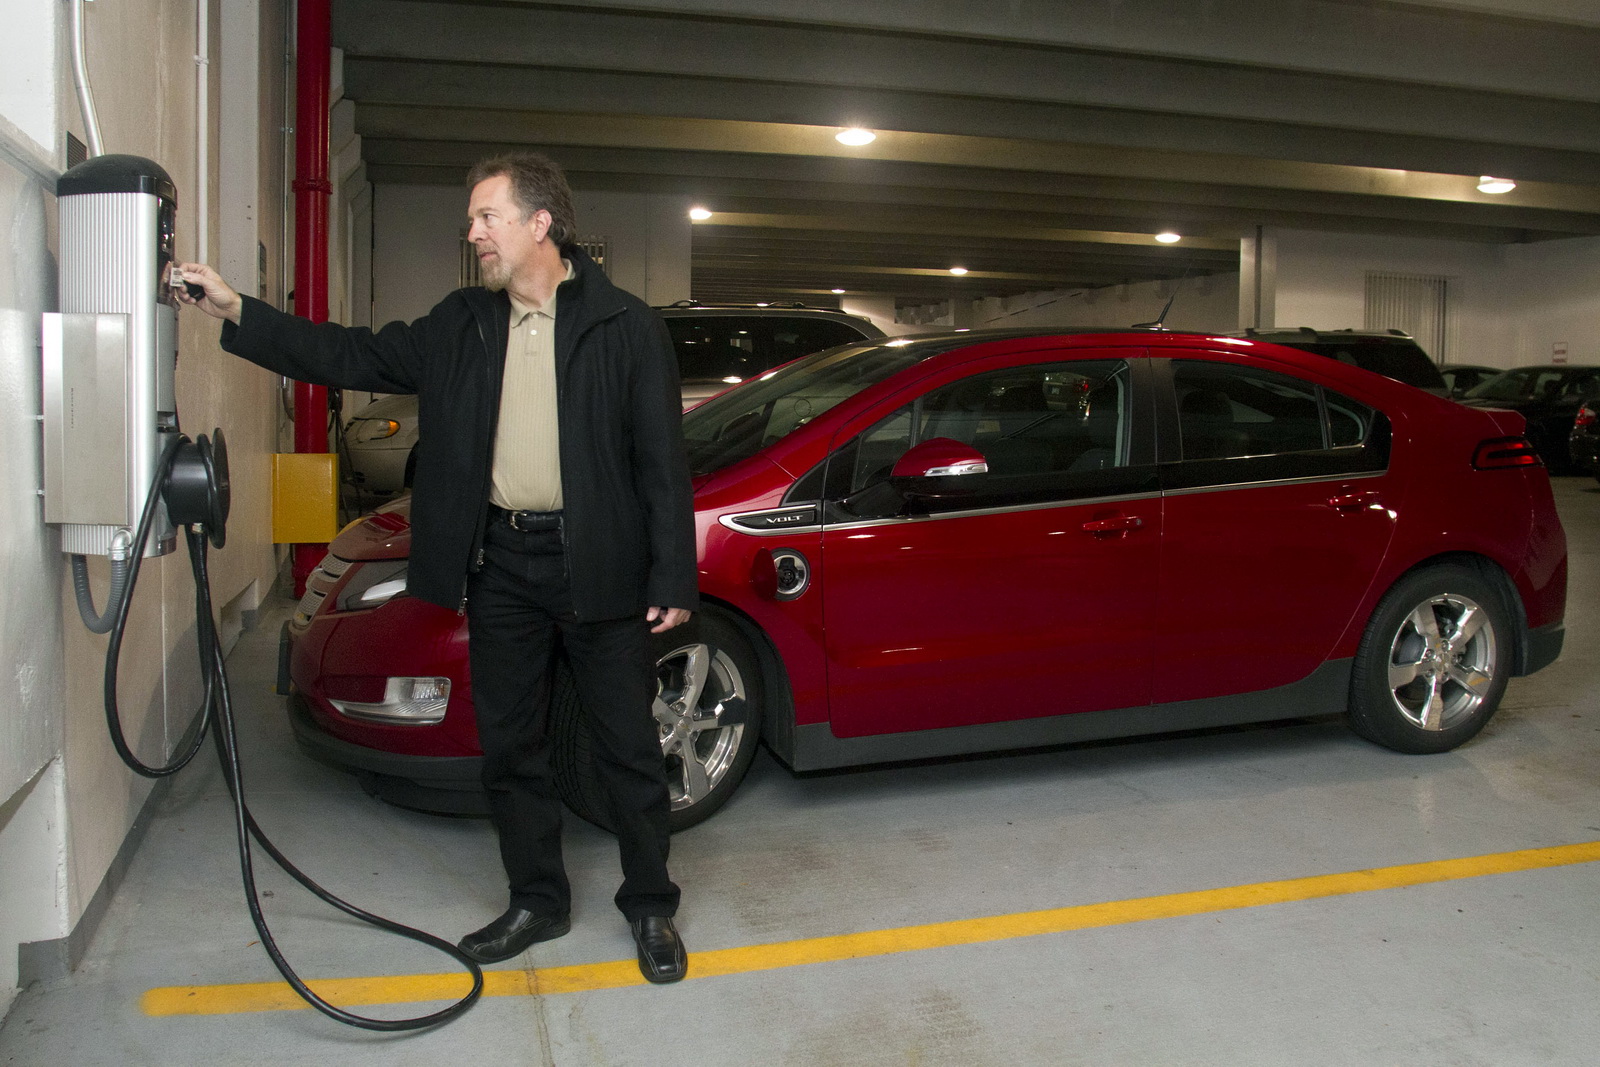 Chevrolet Volt early adopters